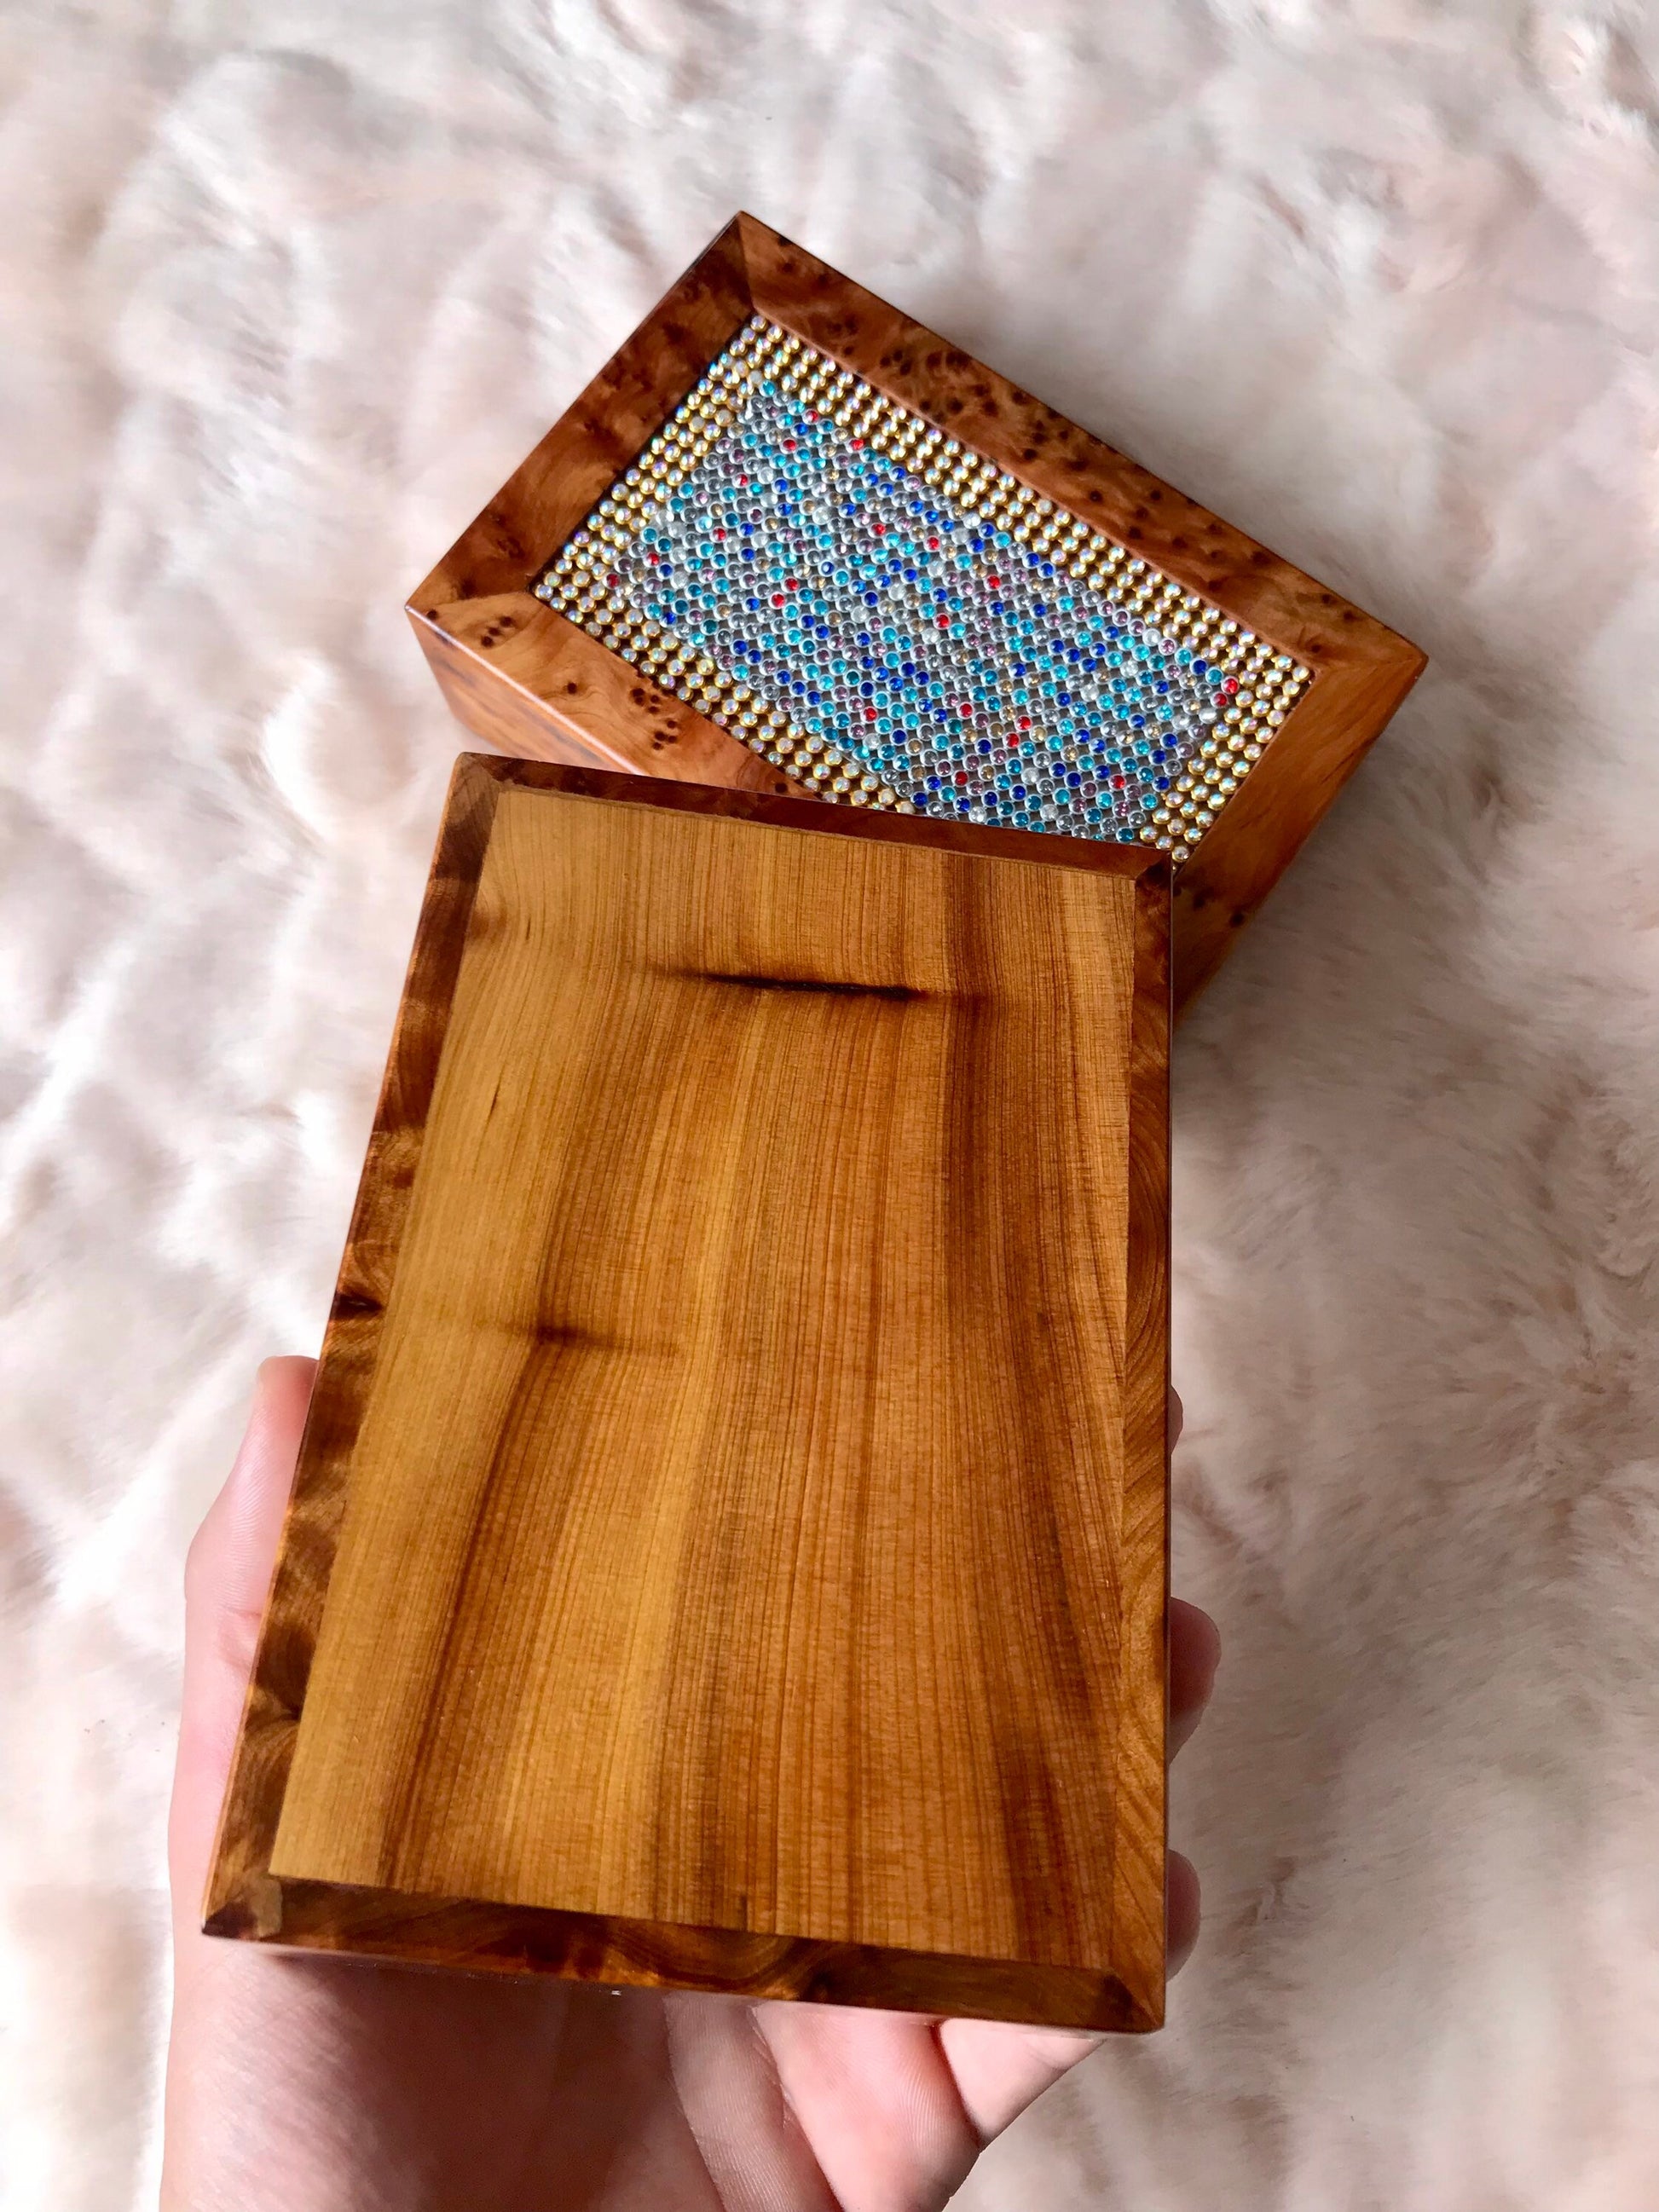 6"x4" jewellery Box for Women,Wedding,Anniversary Gift For Wife,girl,wooden box inlay chest with stones,couple's custom Box,emotional gift